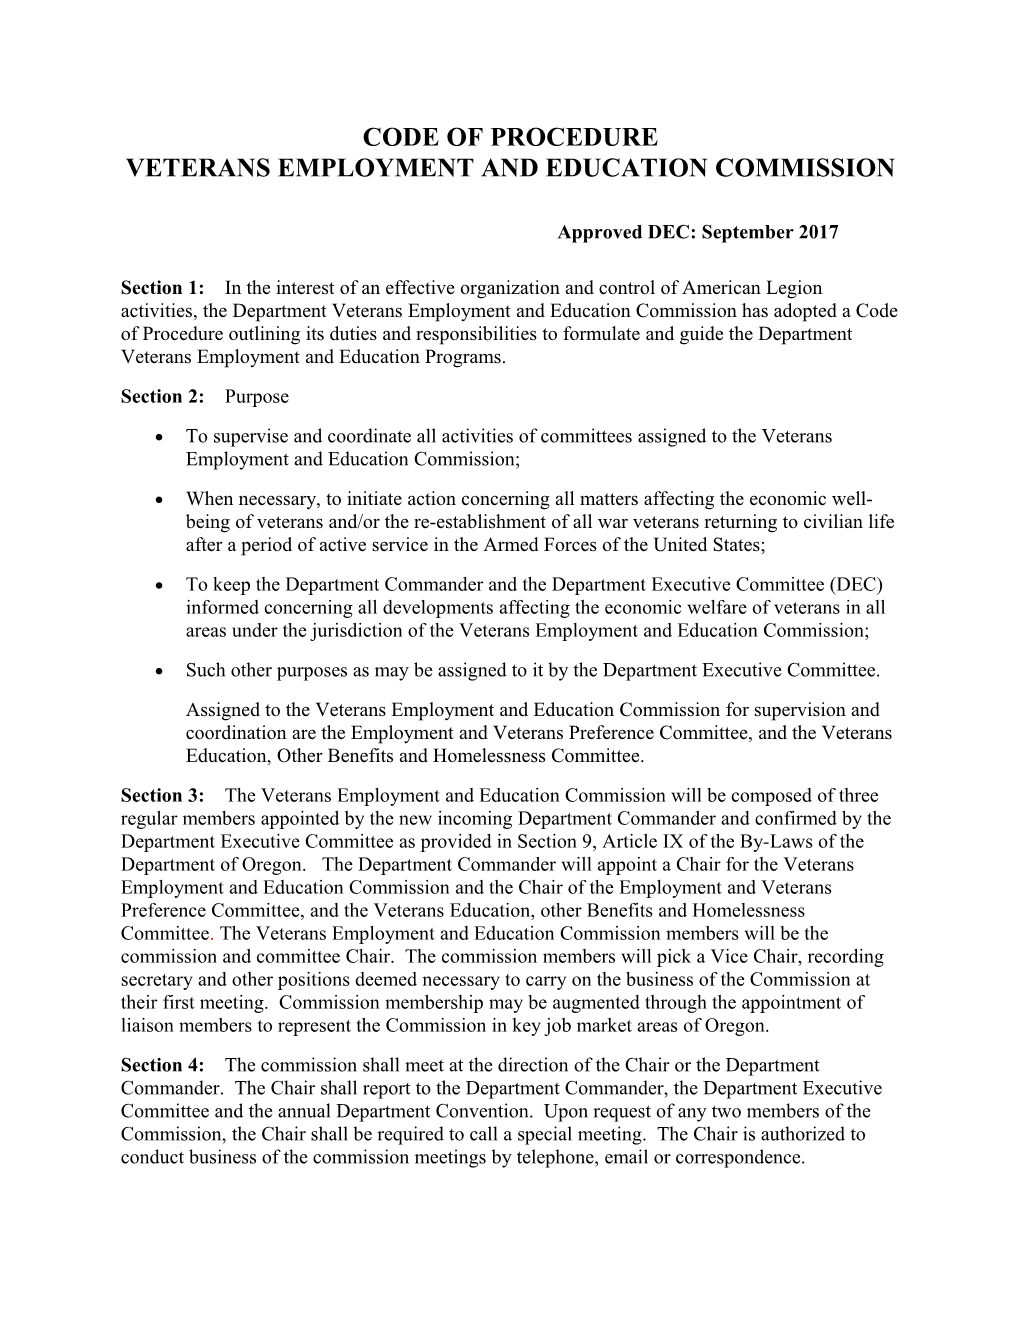 Veterans Employment and Education Commission